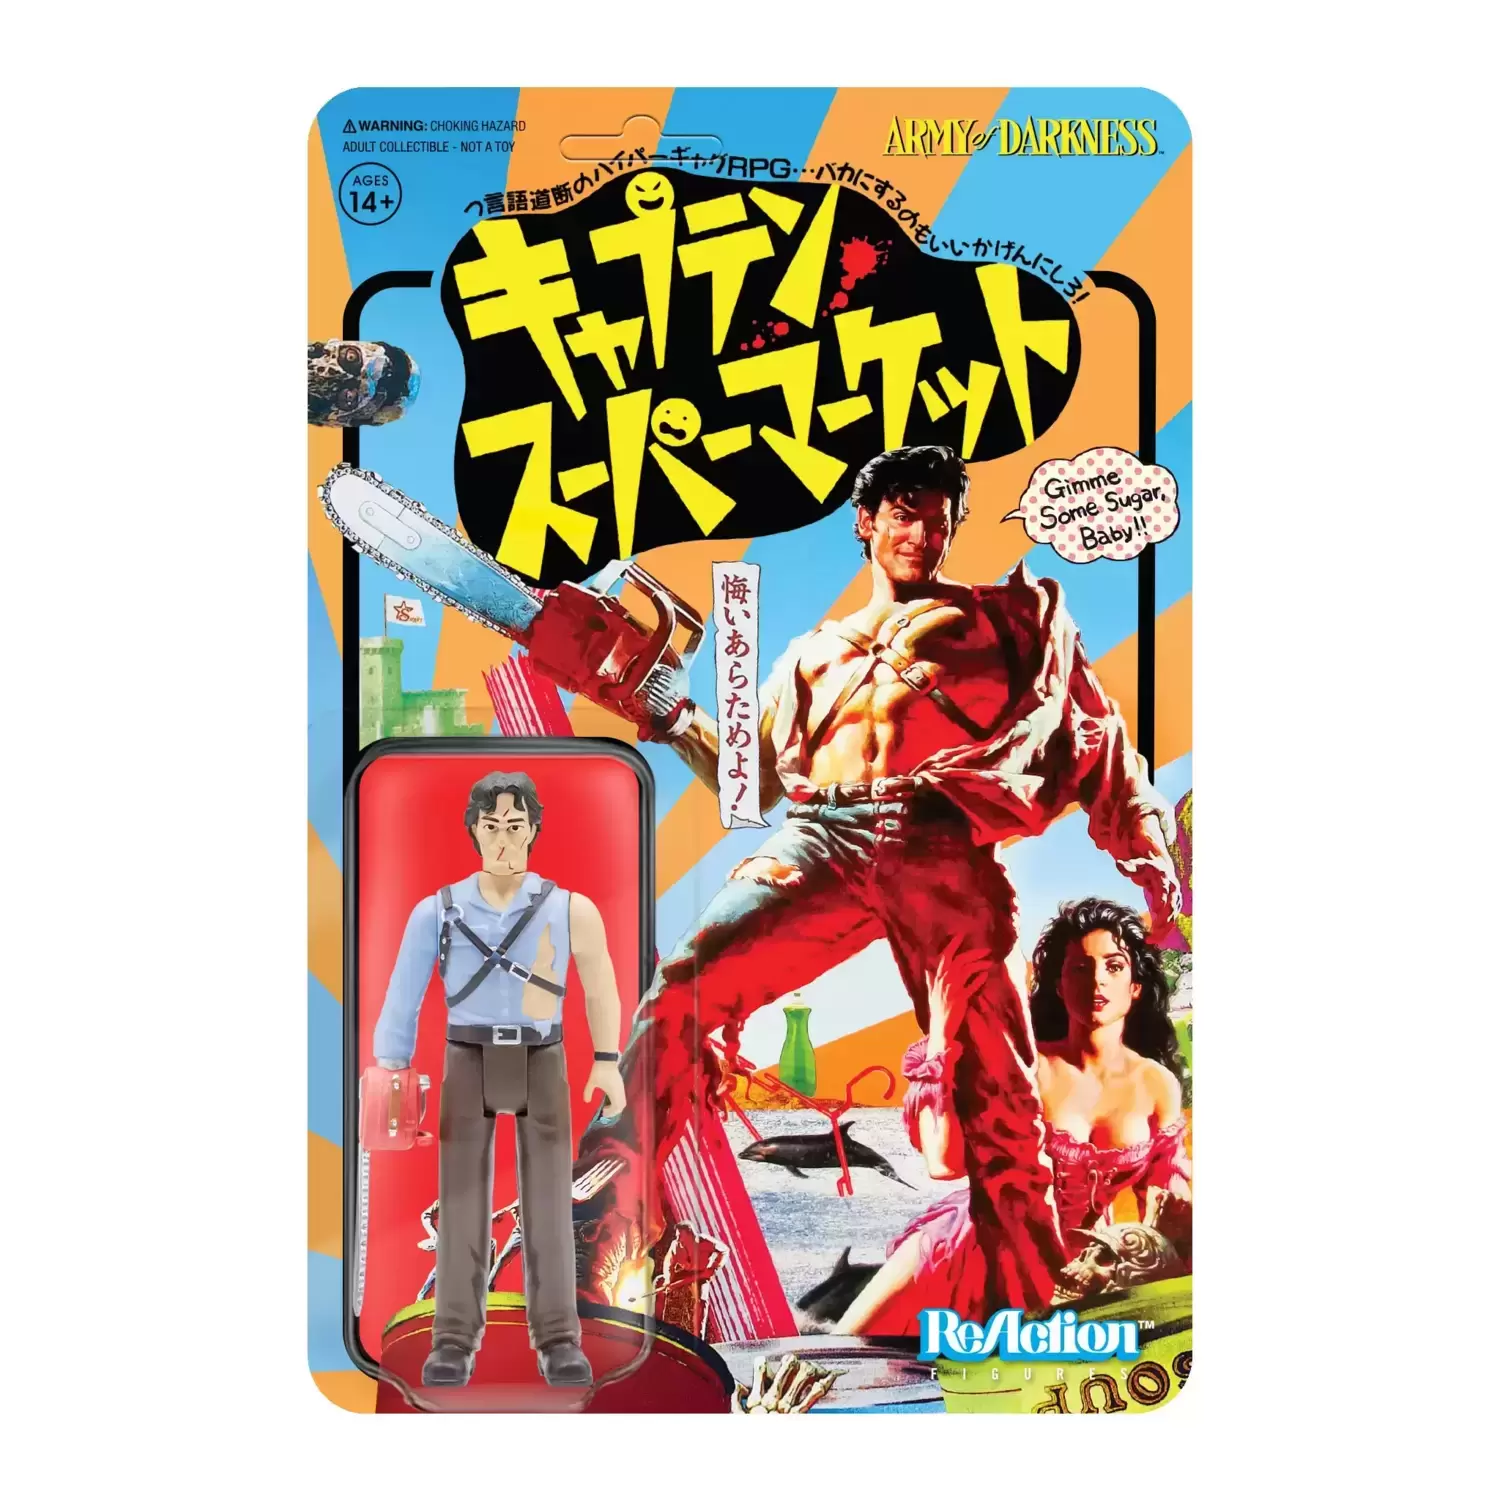 ReAction Figures - Army of Darkness - Hero Ash (Japanese Movie Poster)